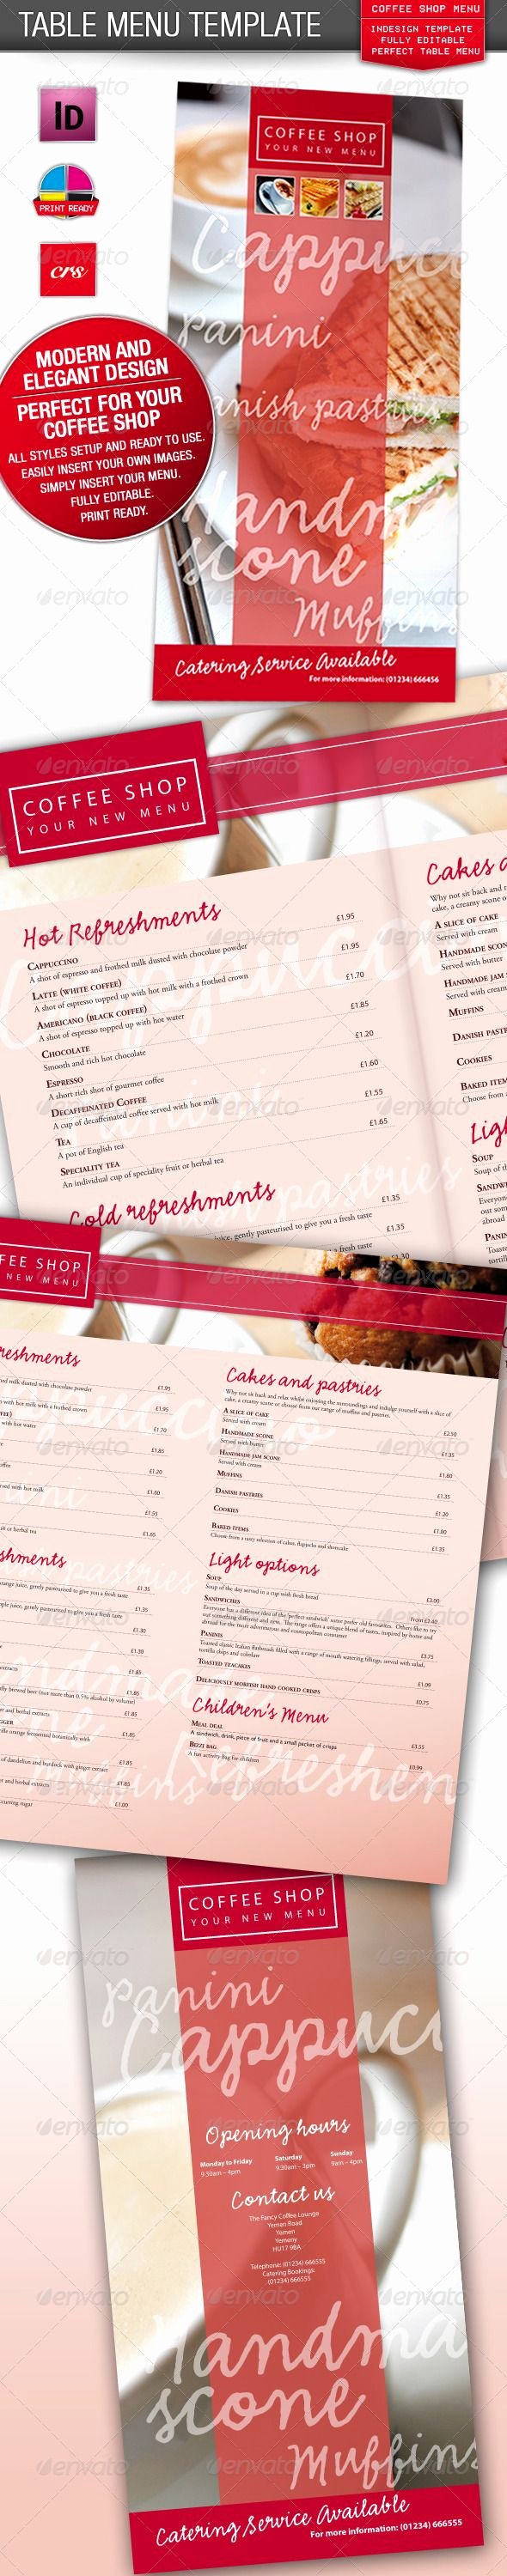 Coffee Shop Menu Template Fresh 17 Best Images About Print Templates On Pinterest